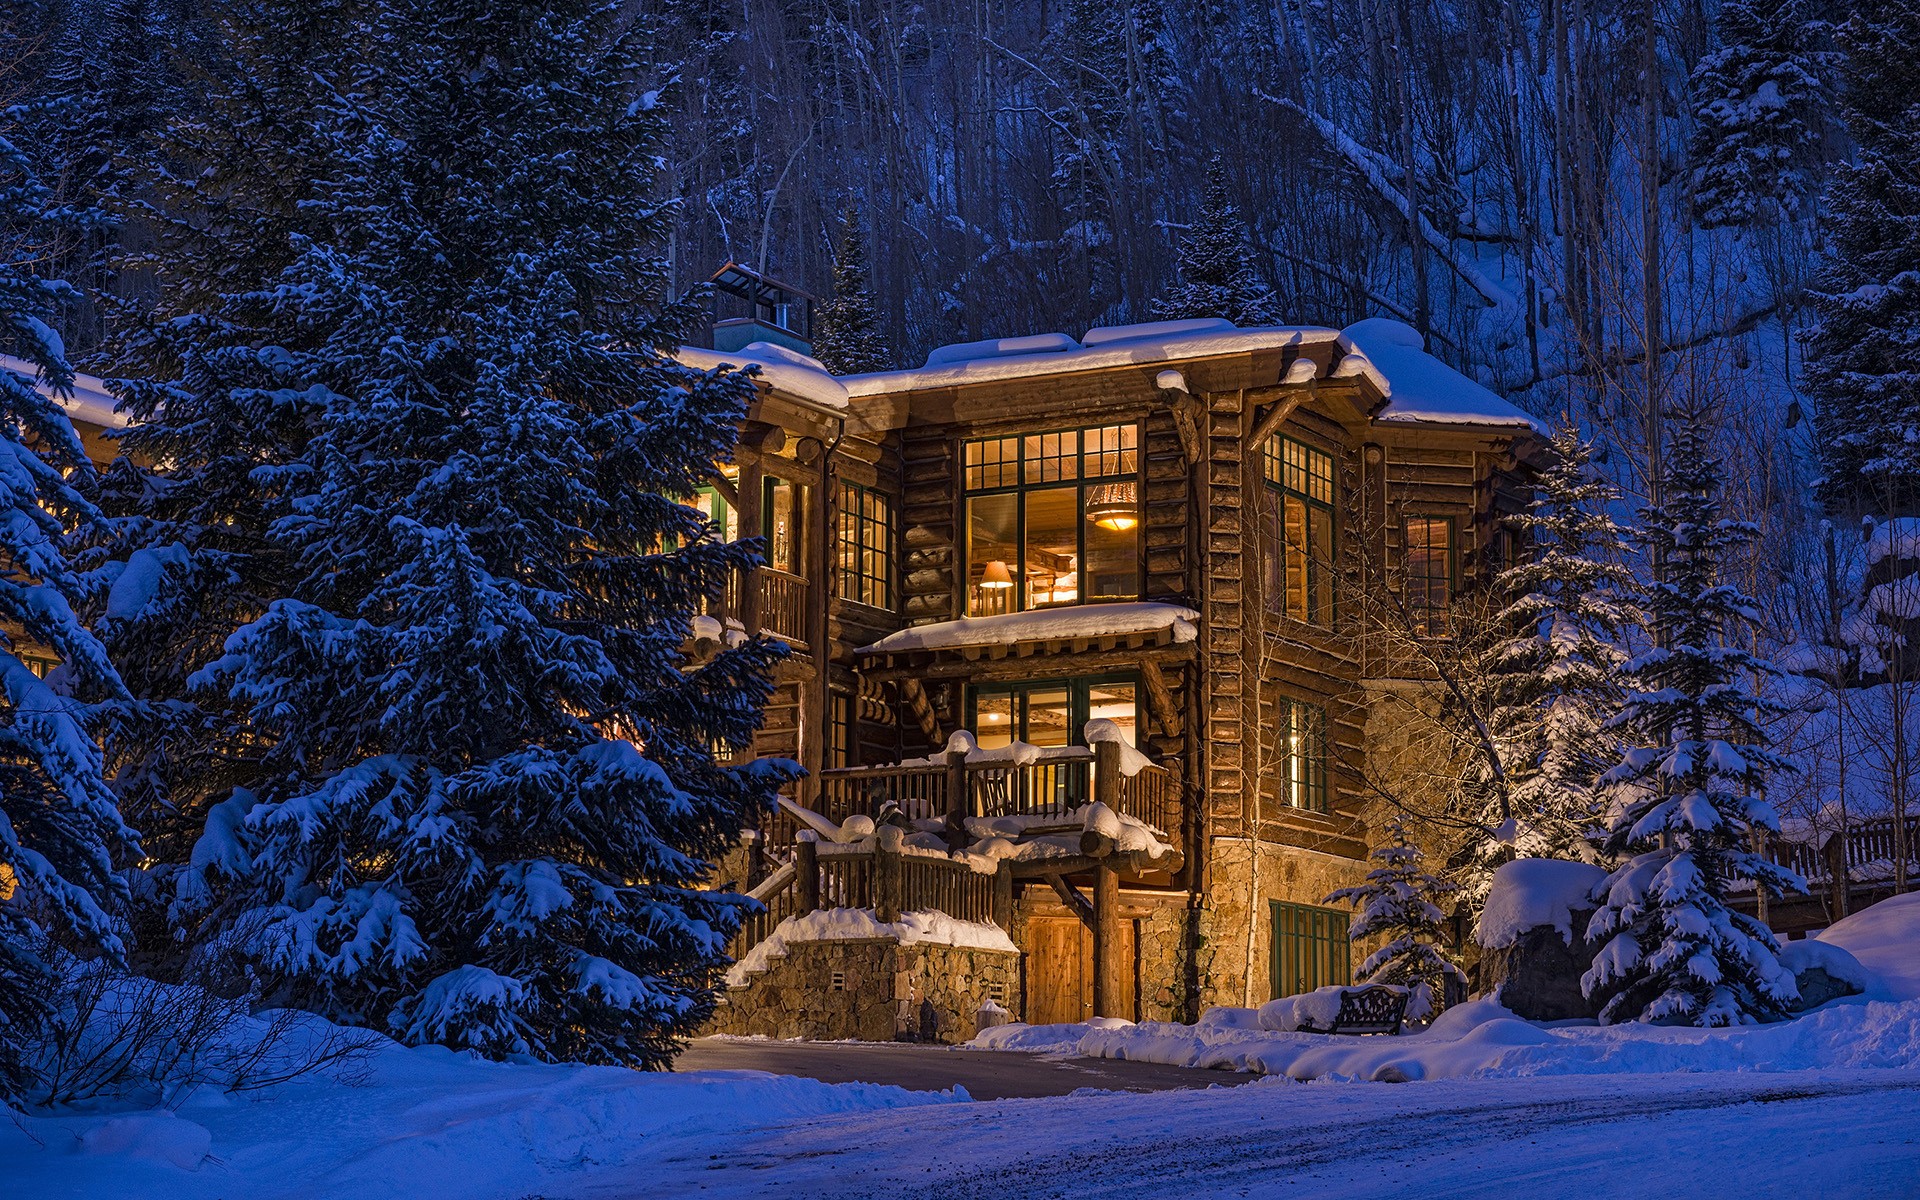 General 1920x1200 nature trees forest architecture Colorado USA house winter snow evening lights wood luxury